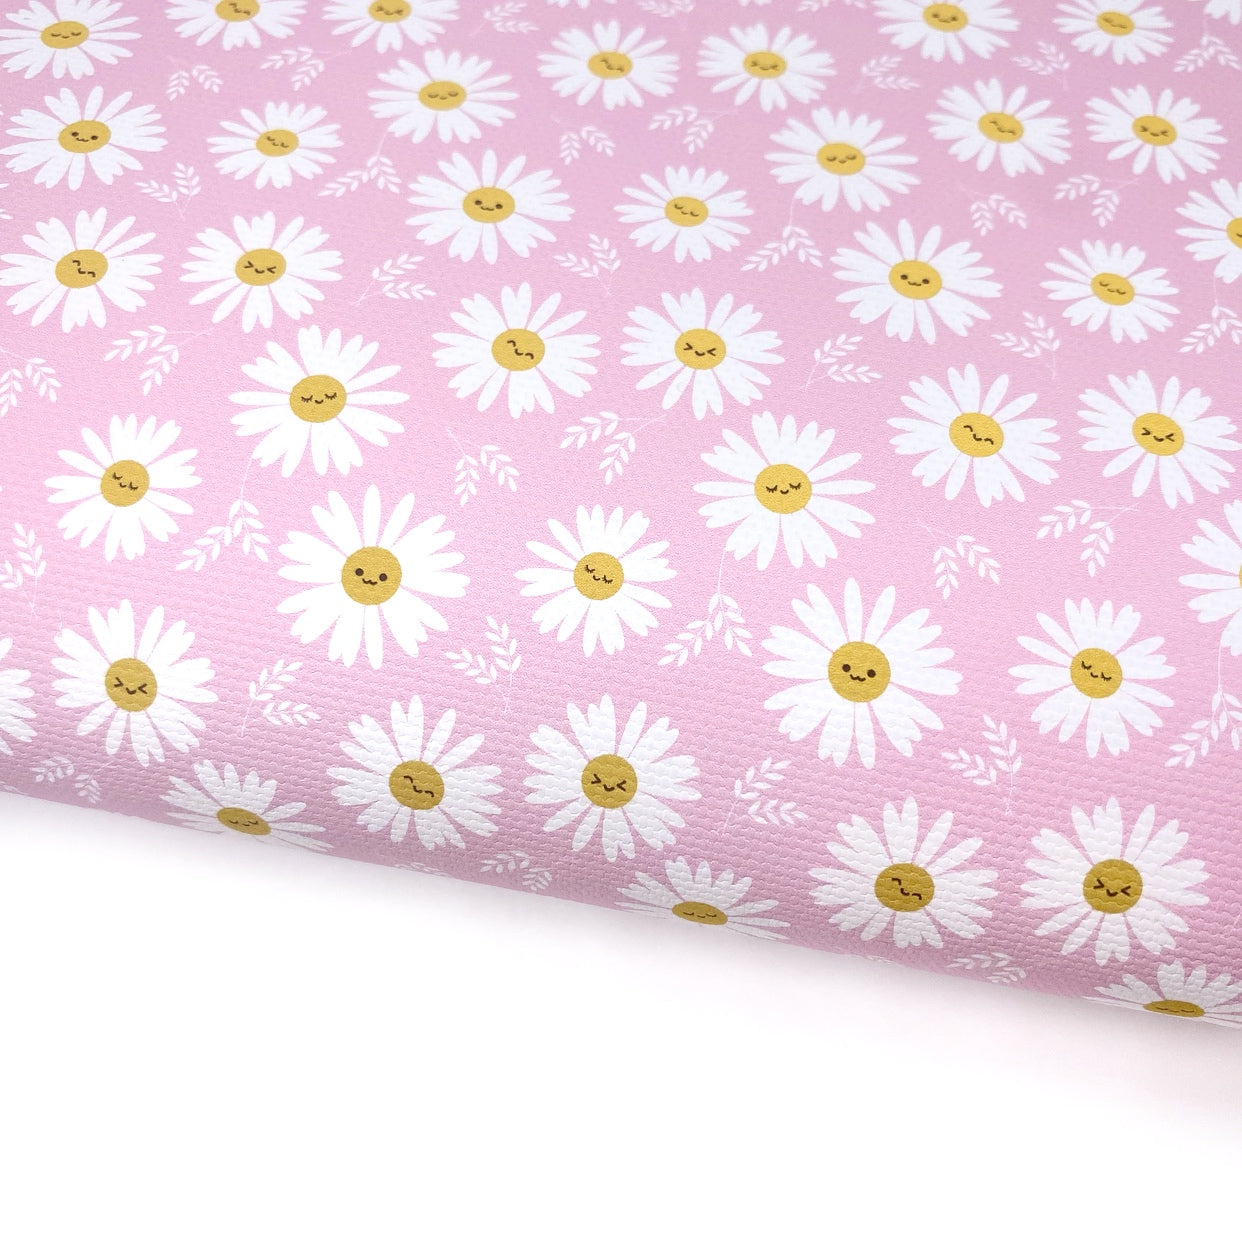 Daisy Face Pink Lux Premium Printed Bow Fabric